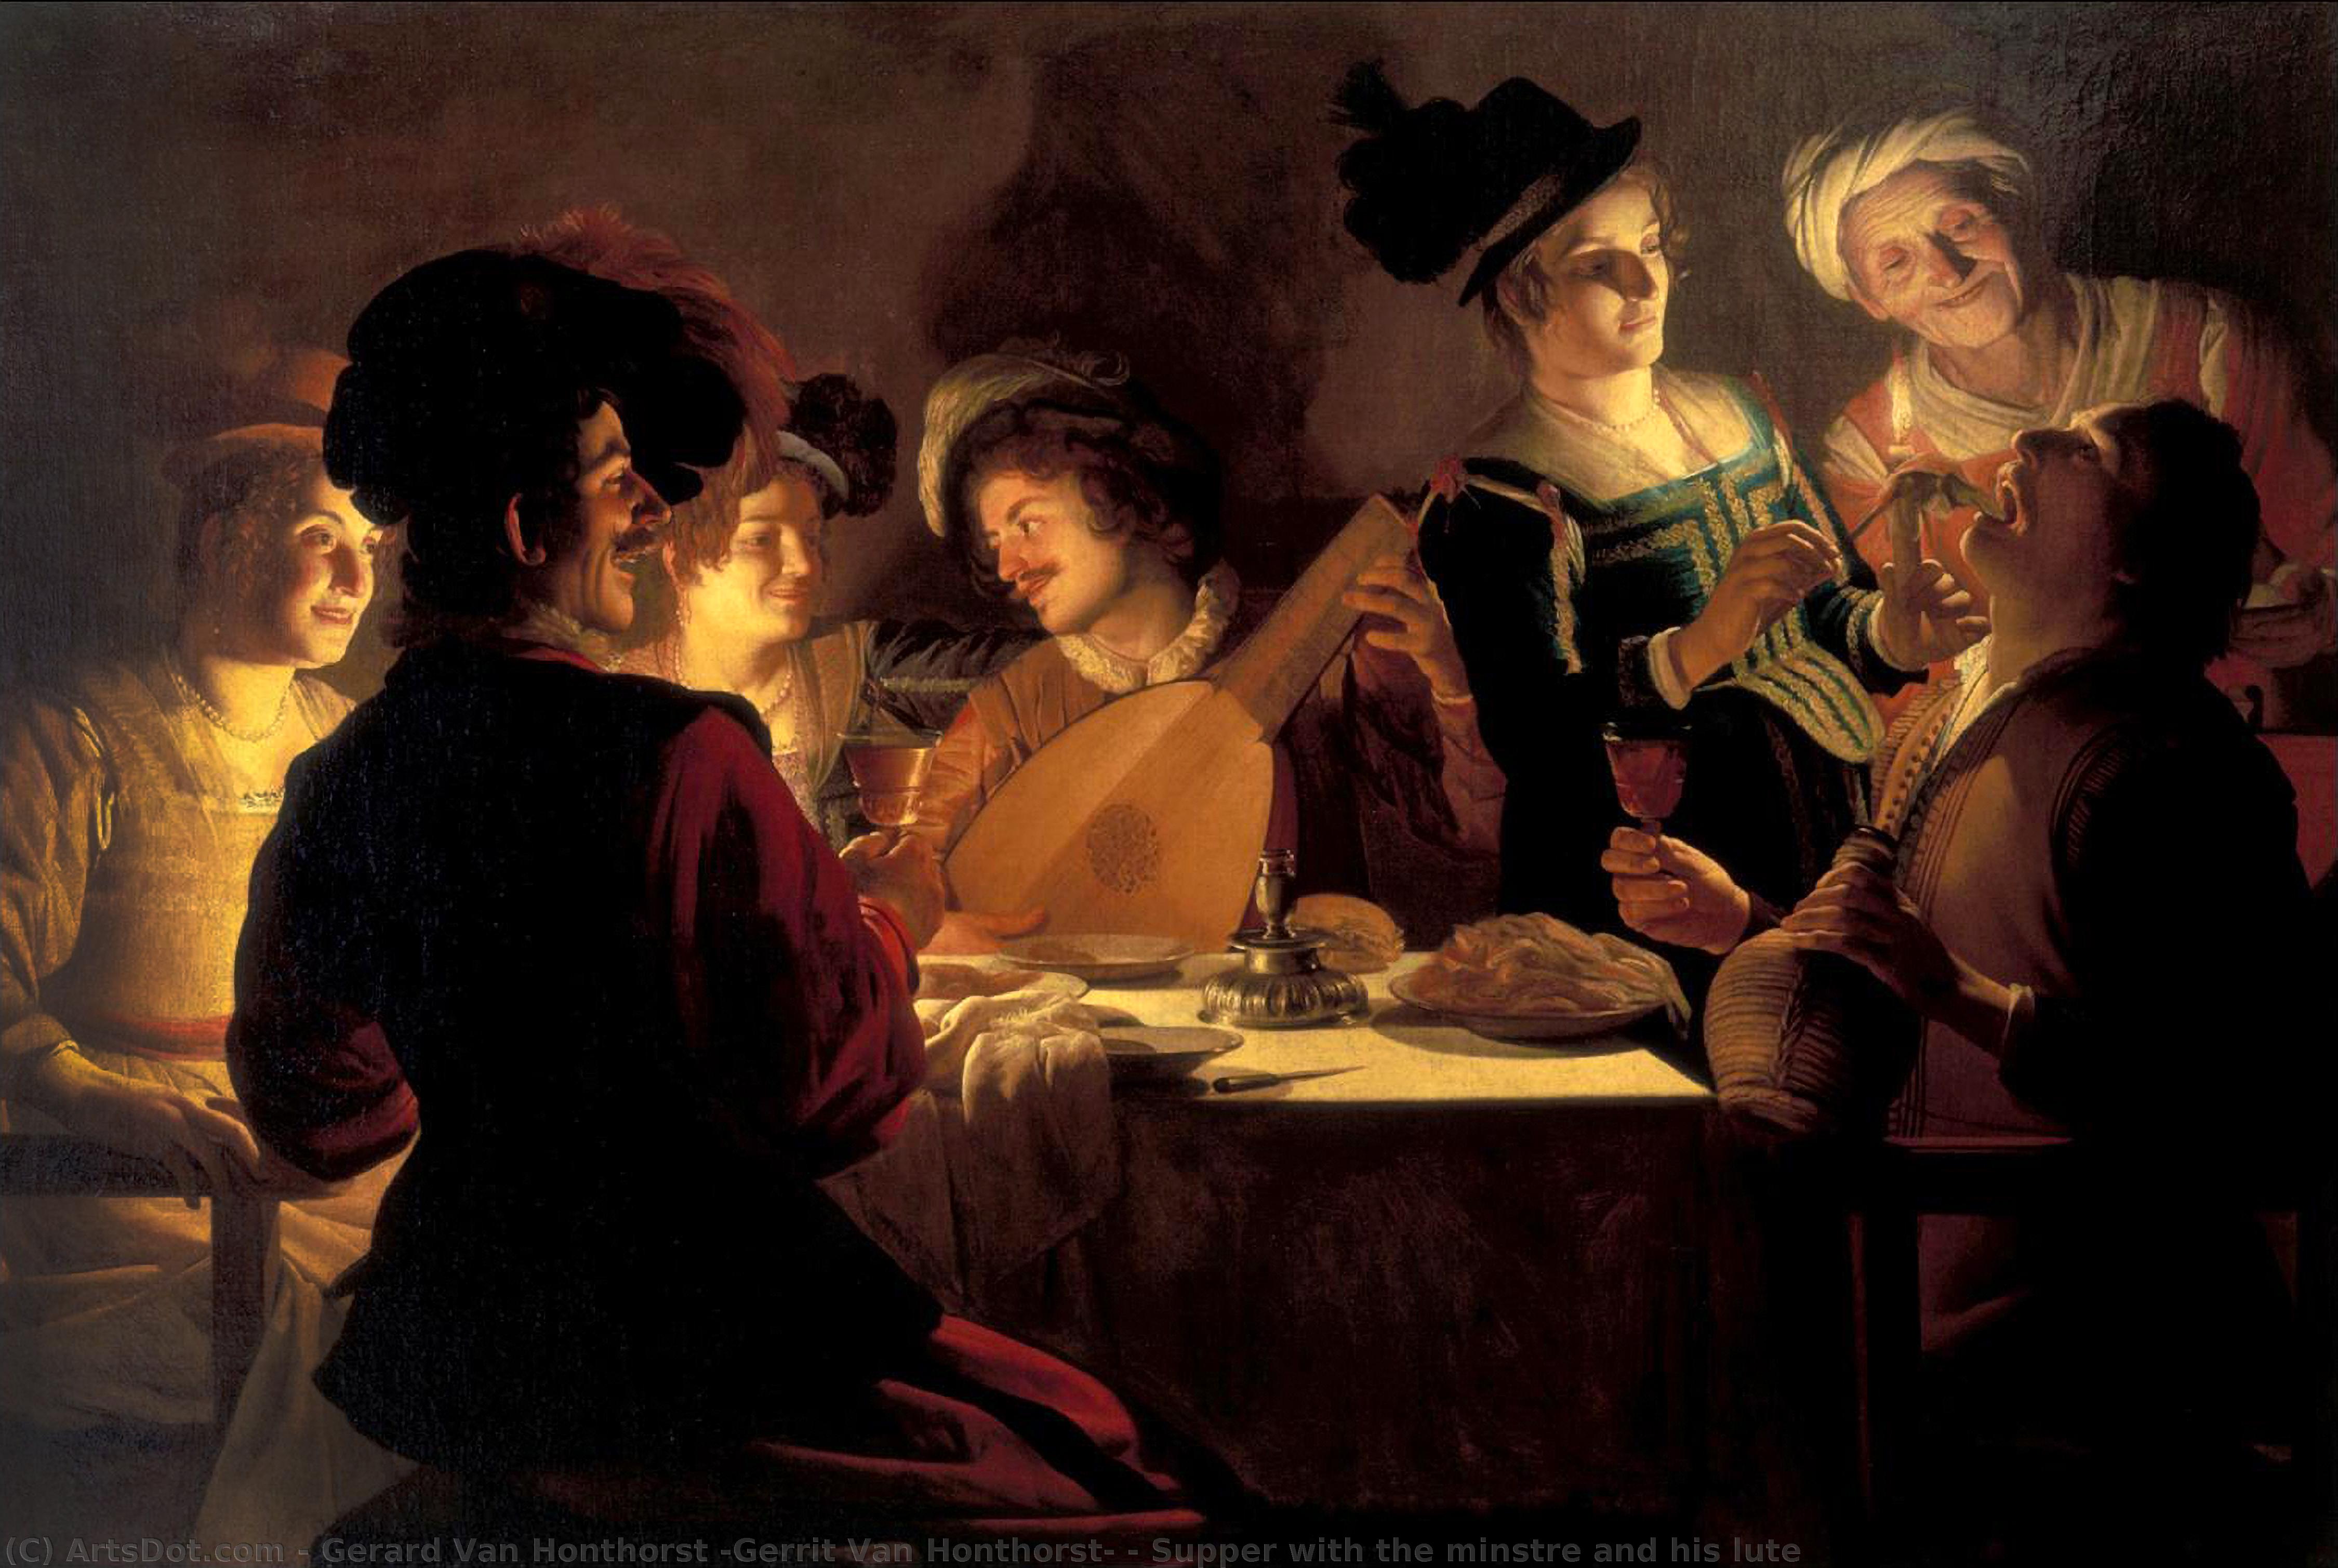 Buy Museum Art Reproductions Supper with the minstre and his lute / Merry company with a Lute Player, 1619 by Gerard Van Honthorst (Gerrit Van Honthorst) (1590-1656, Netherlands) | ArtsDot.com